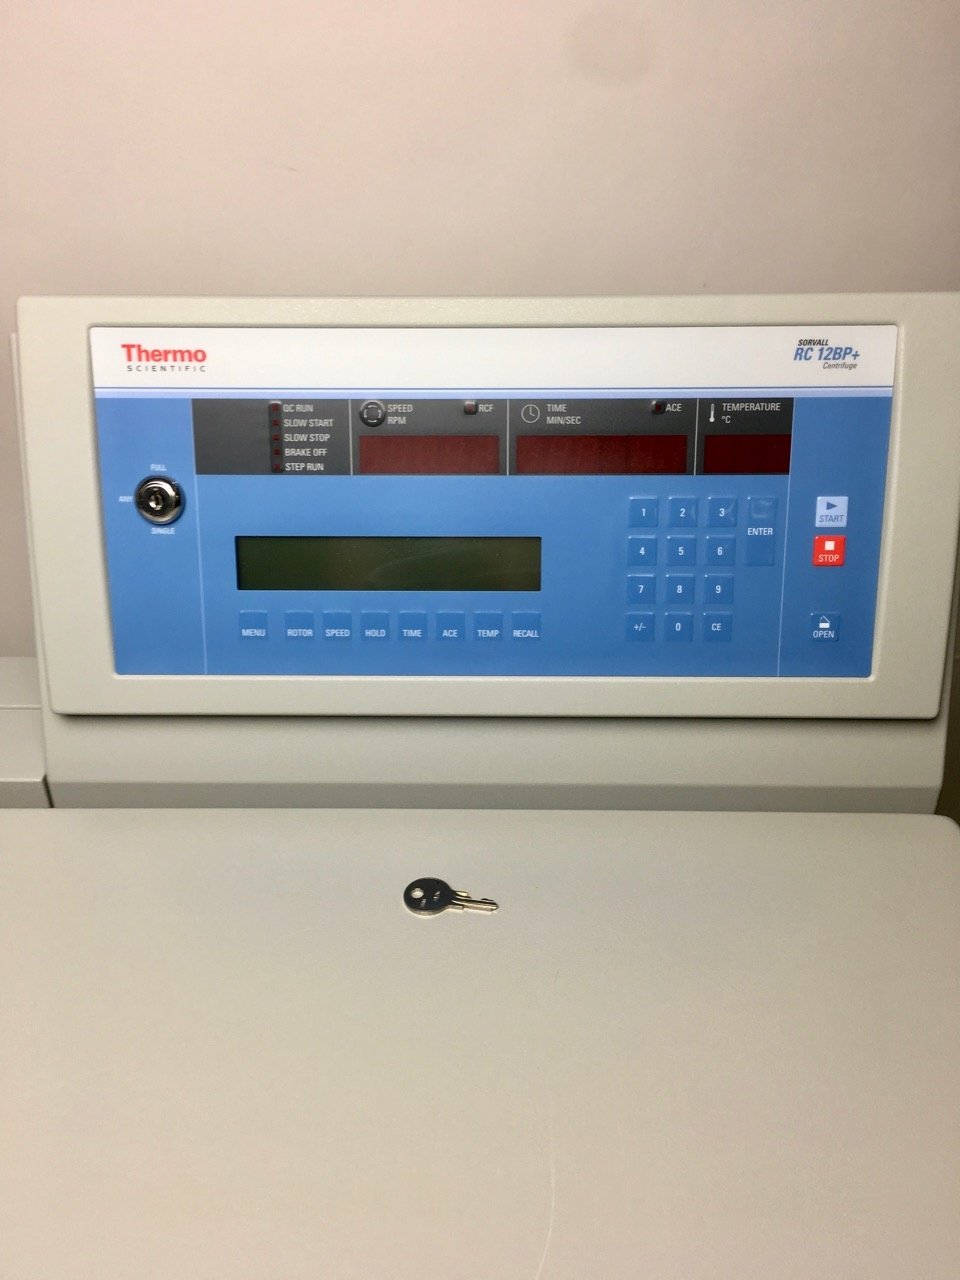 Thermo Scientific Thermo RC 12BP+ floorstanding centrifuge incl. H-12000 rotor